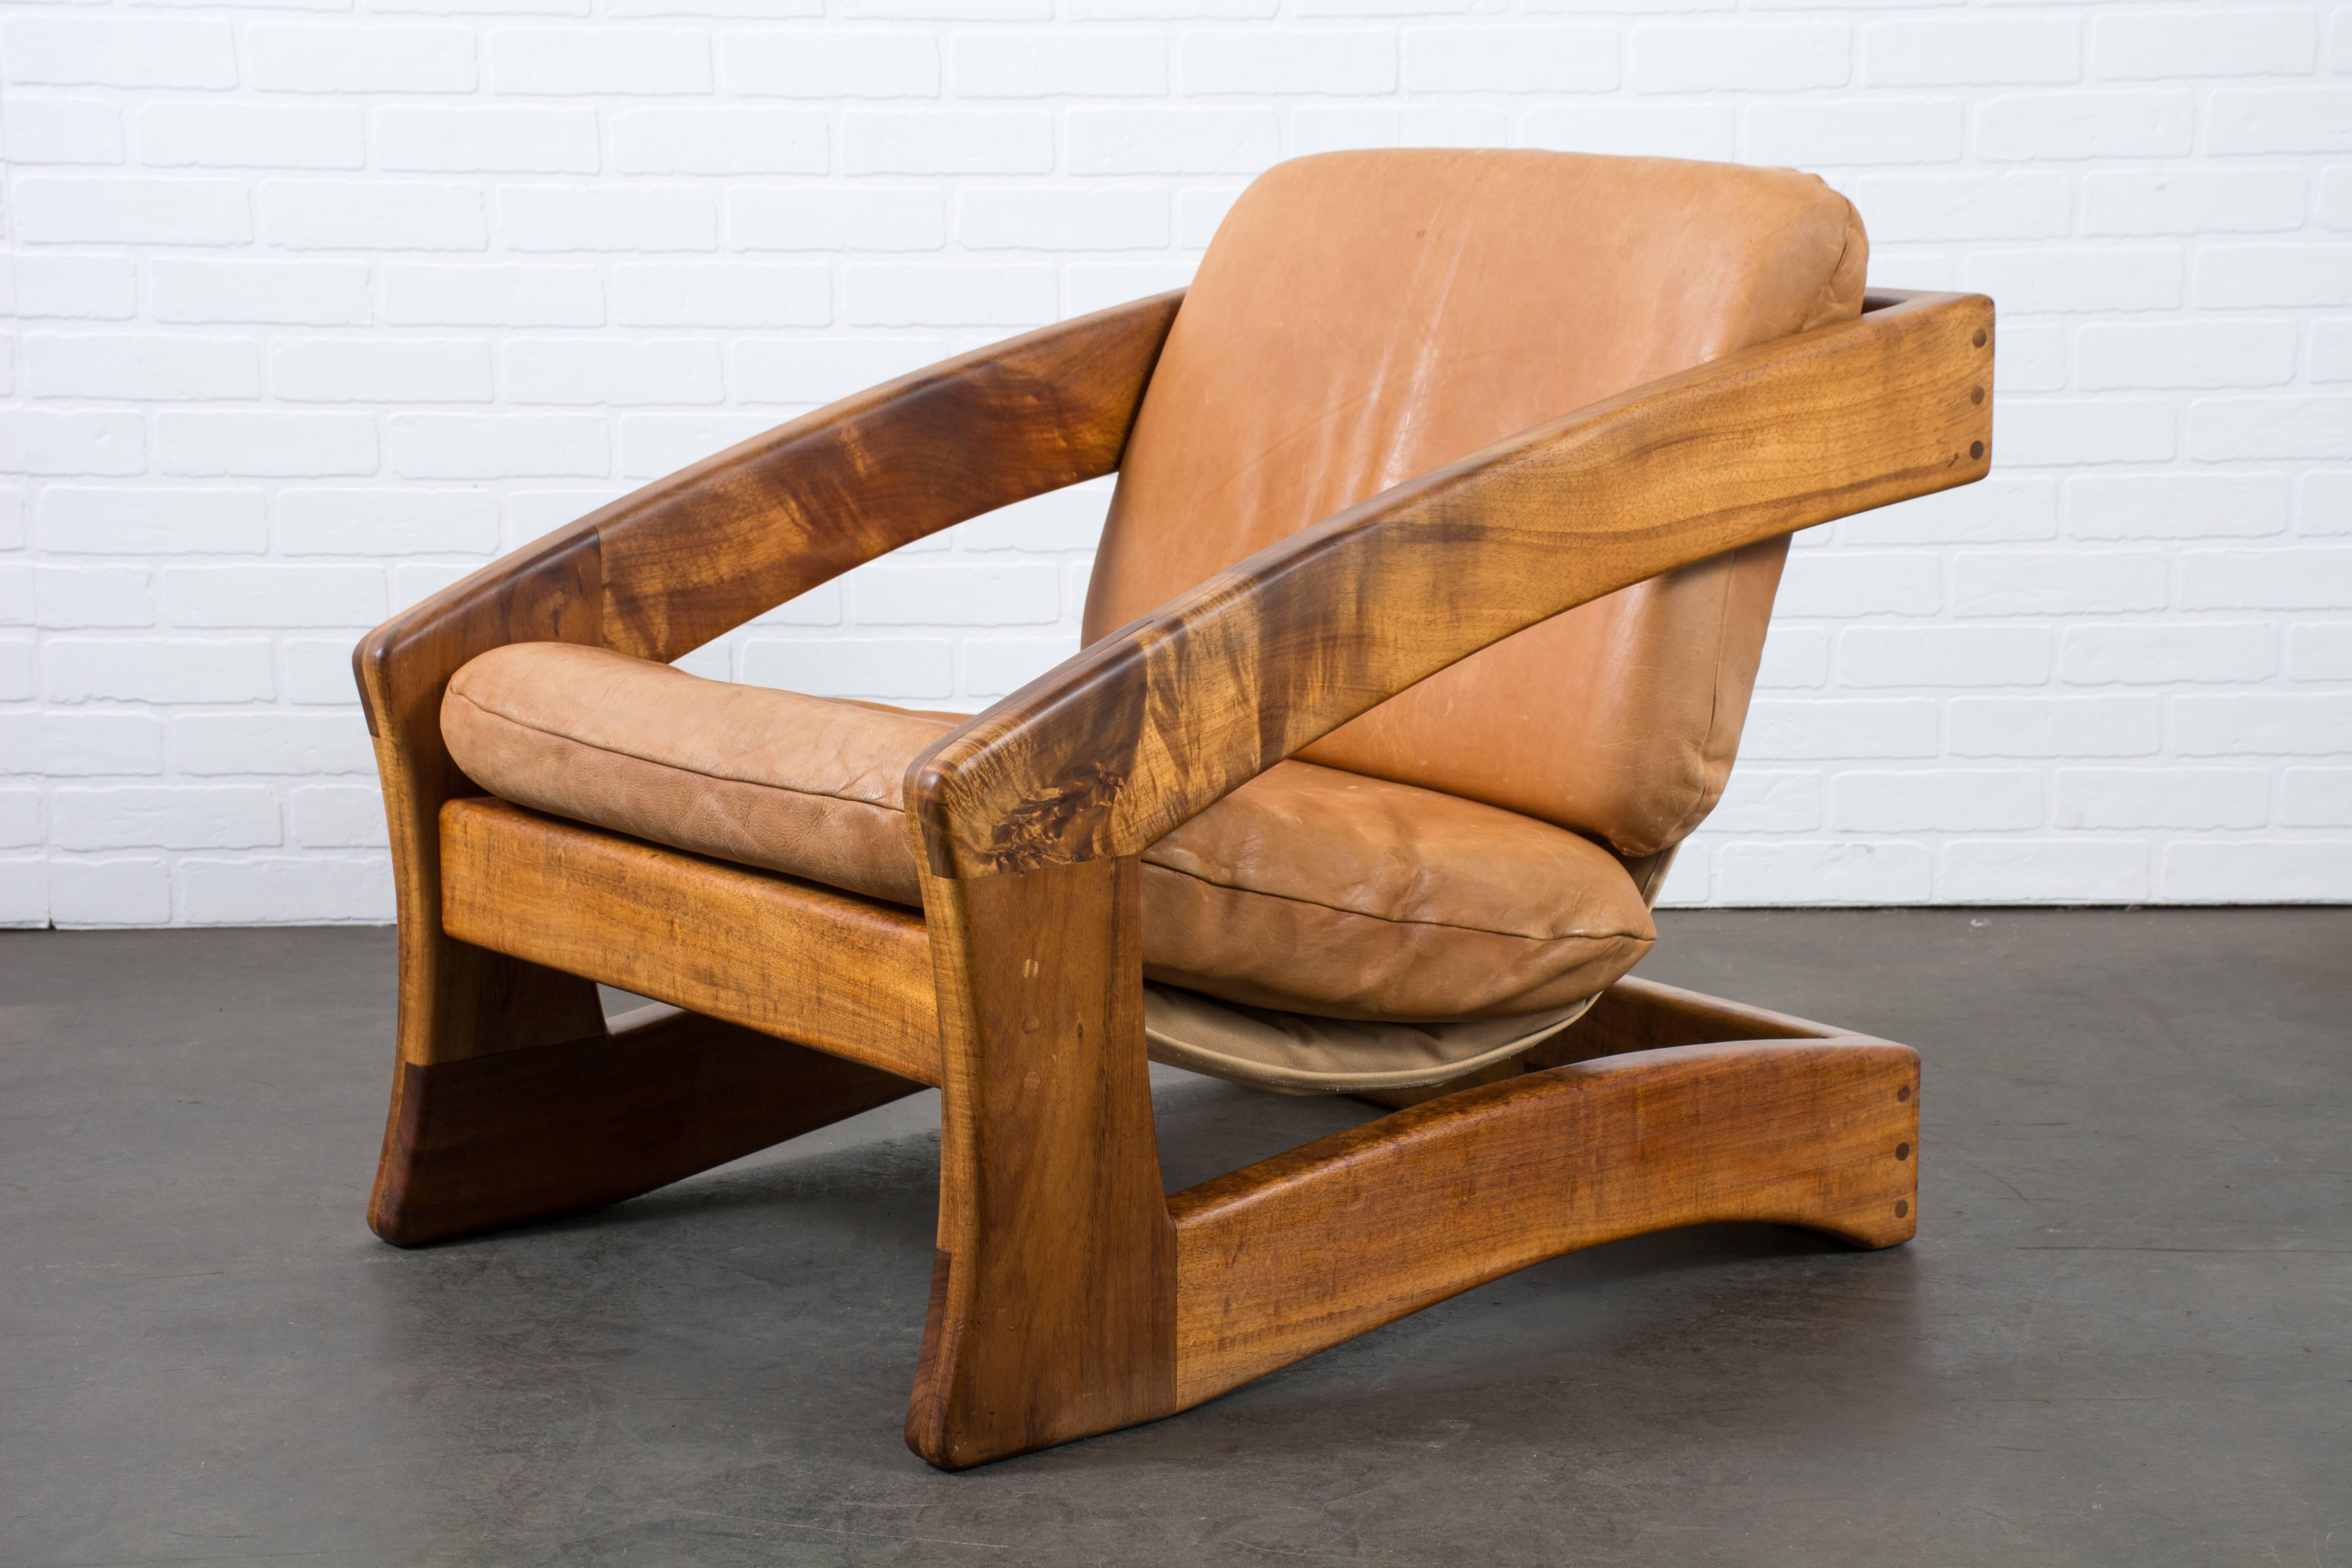 American Vintage Leather Lounge Chair by Robert and Joanne Herzog